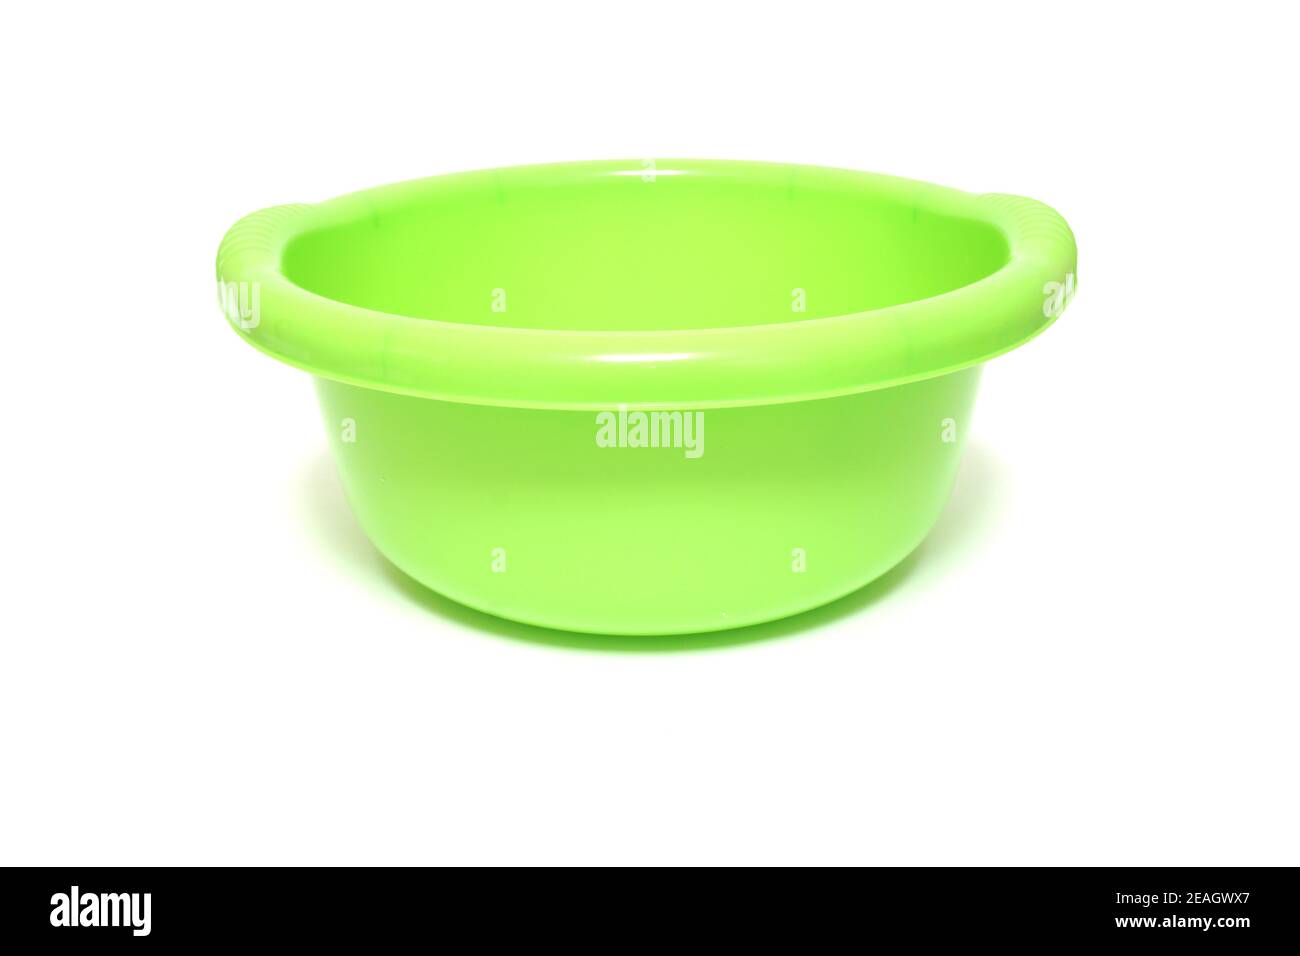 Green plastic bowl isolated on white background Stock Photo